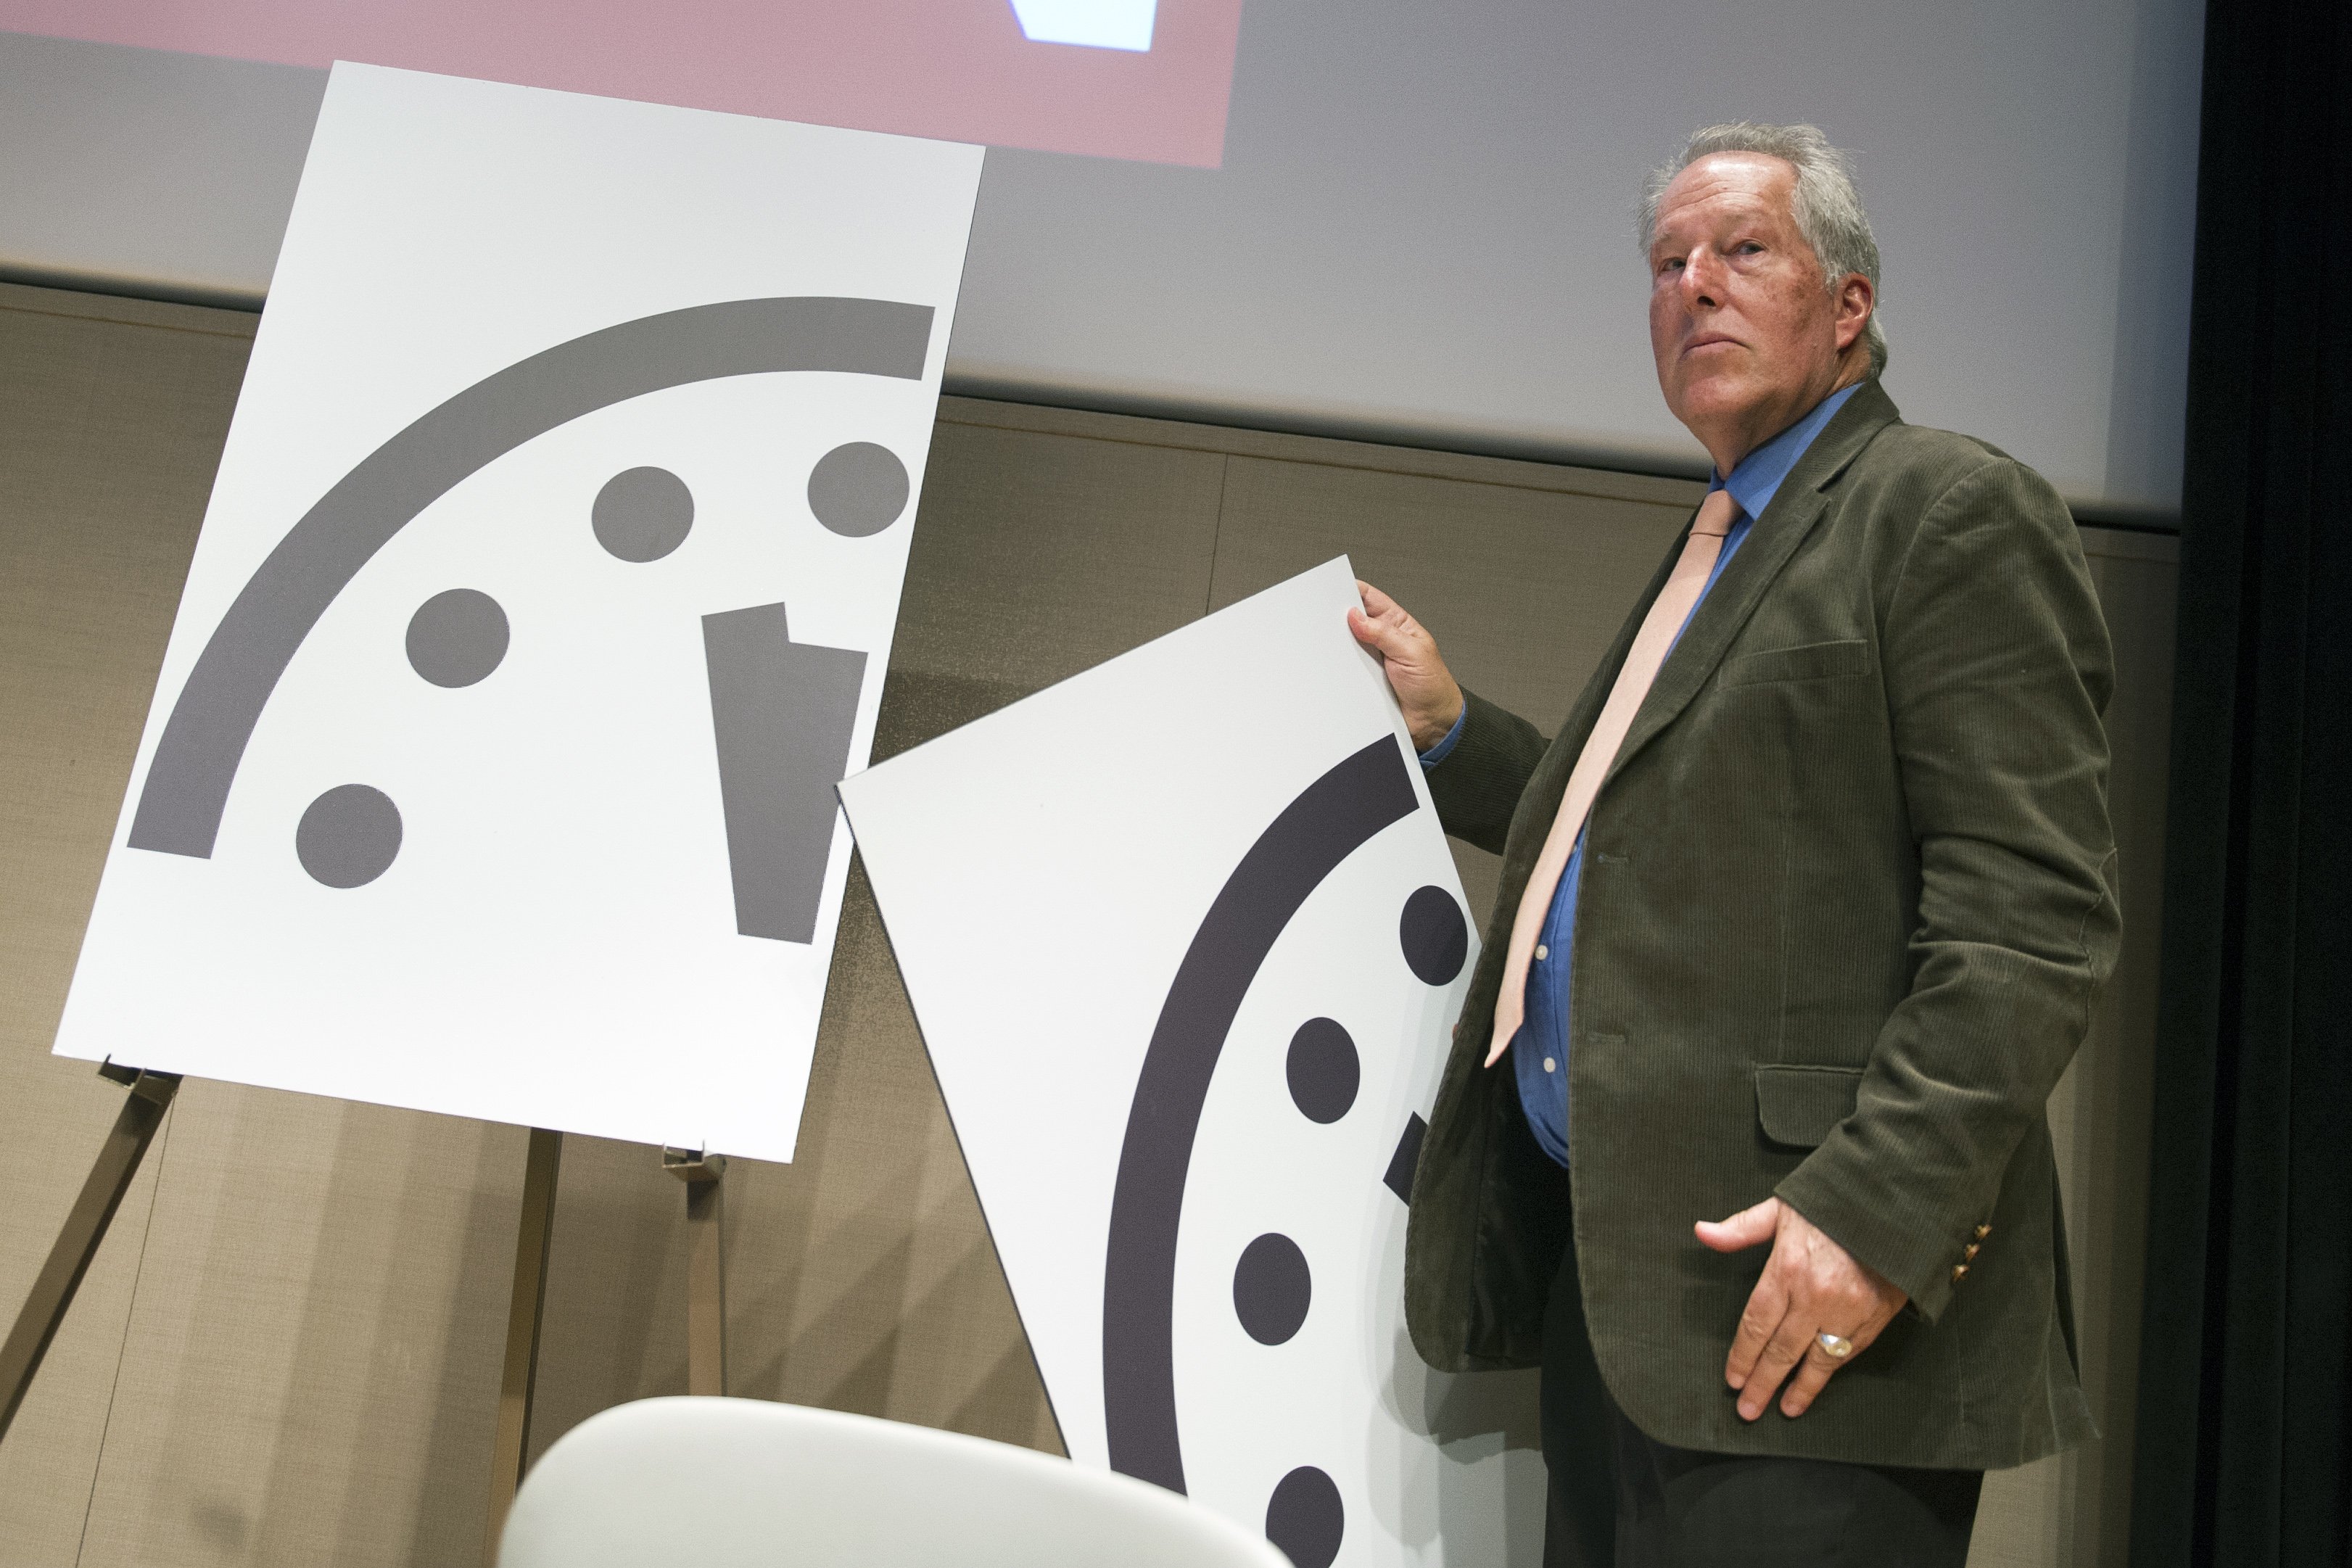 Climate scientist Richard Somerville, a member, Science and Security Board, Bulletin of the Atomic Scientists, unveils the new Doomsday Clock in Washington on Jan. 22, 2015.